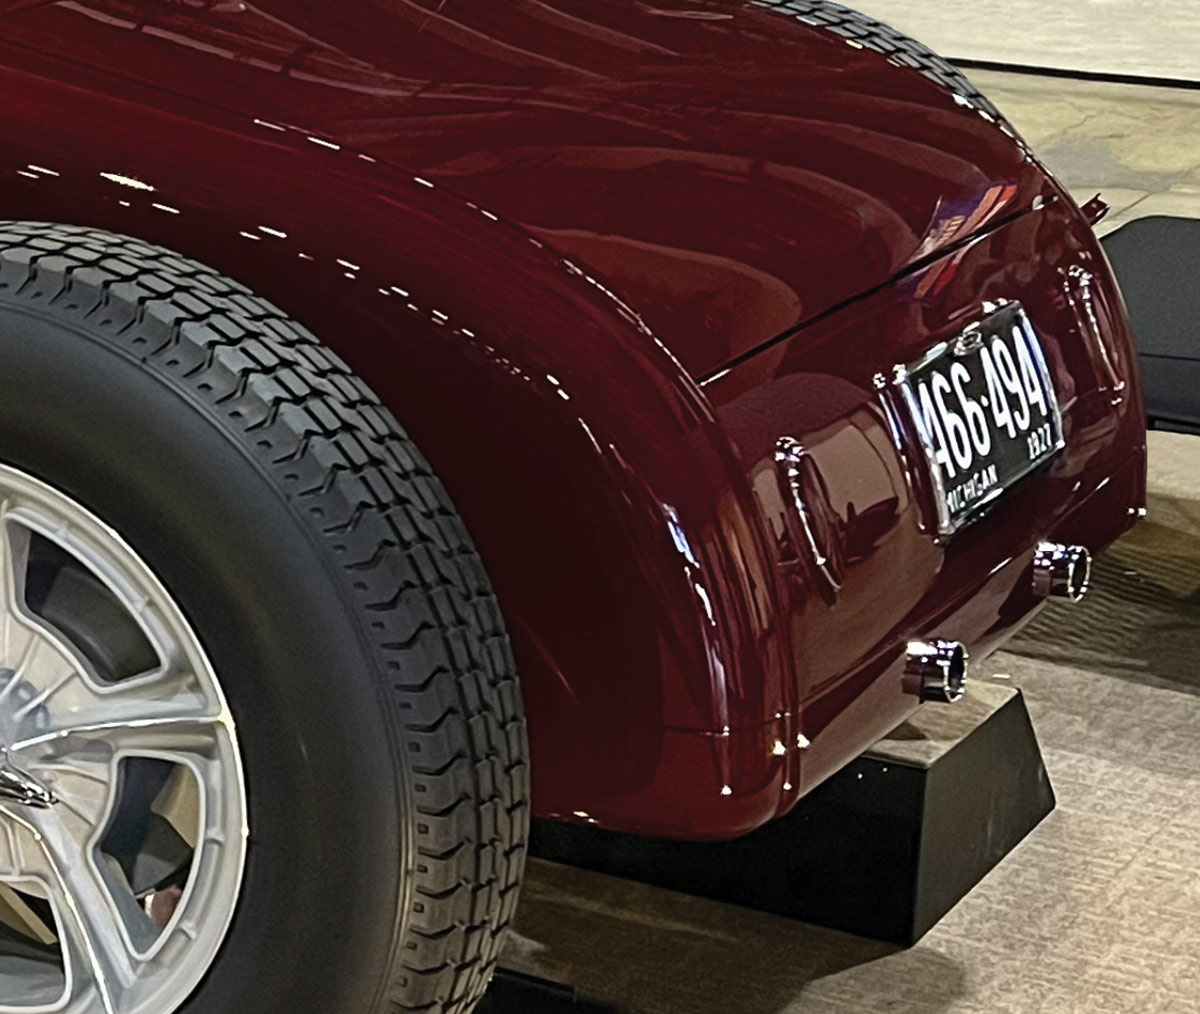 The final assembly and painting were done by Greening Auto Company in Cullman, Alabama. Here can see just how much this roll pan adds to the design of the car.